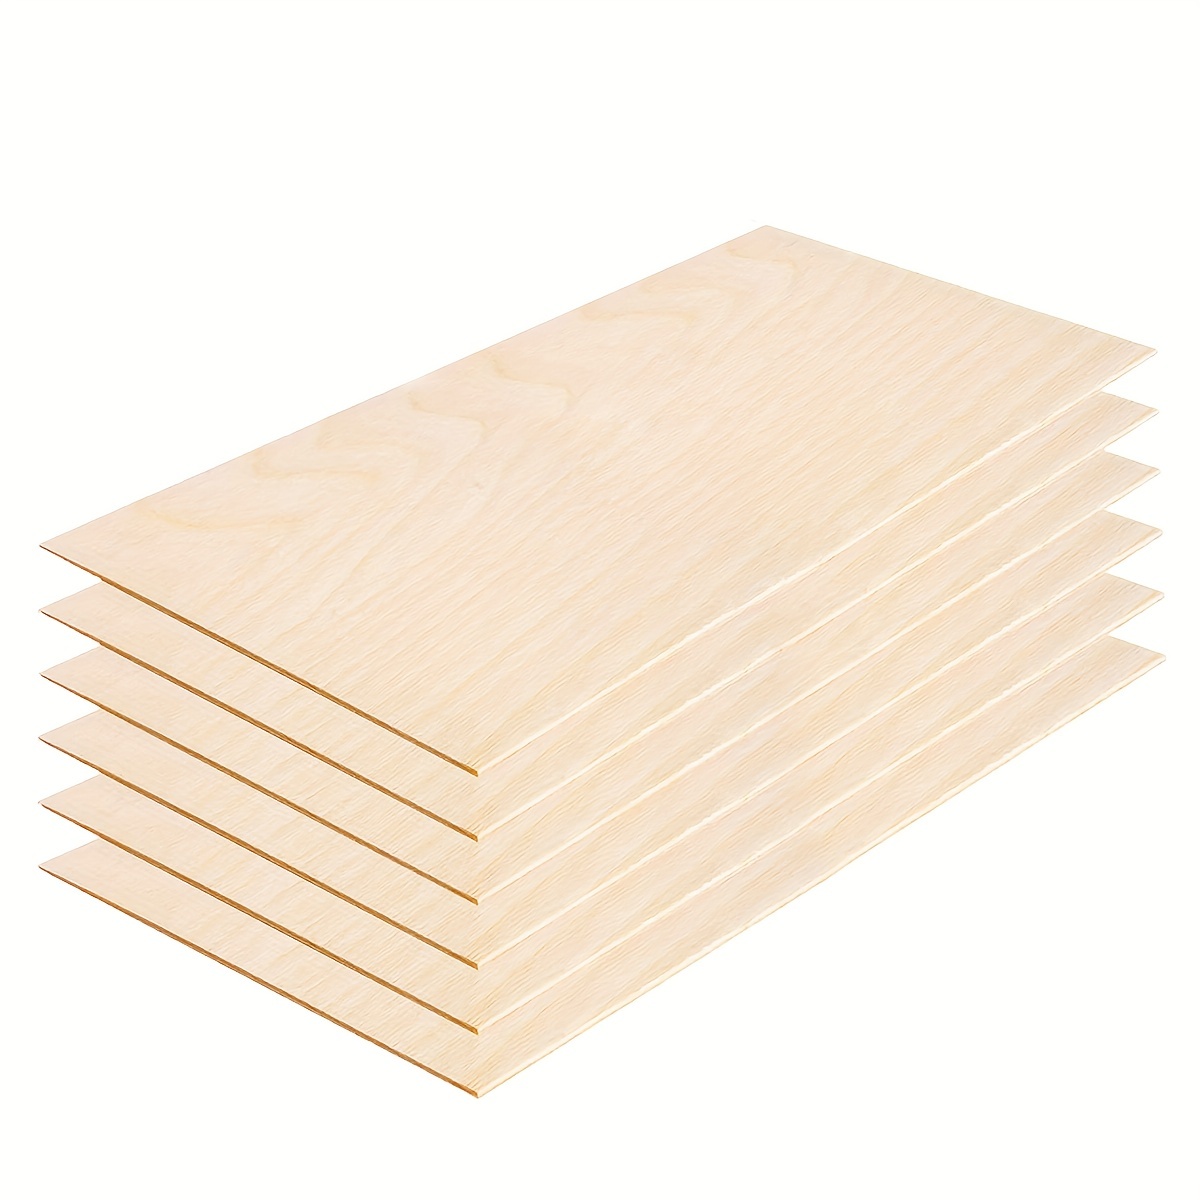 

6 Packs Basswood Sheets 6 X 8 X 1/13 Inch Thin Plywood Wood Sheets Wood Squares Boards Balsa Wood Sheets For Crafts Architectural Models Laser Cutting Wood Burning And Drawin